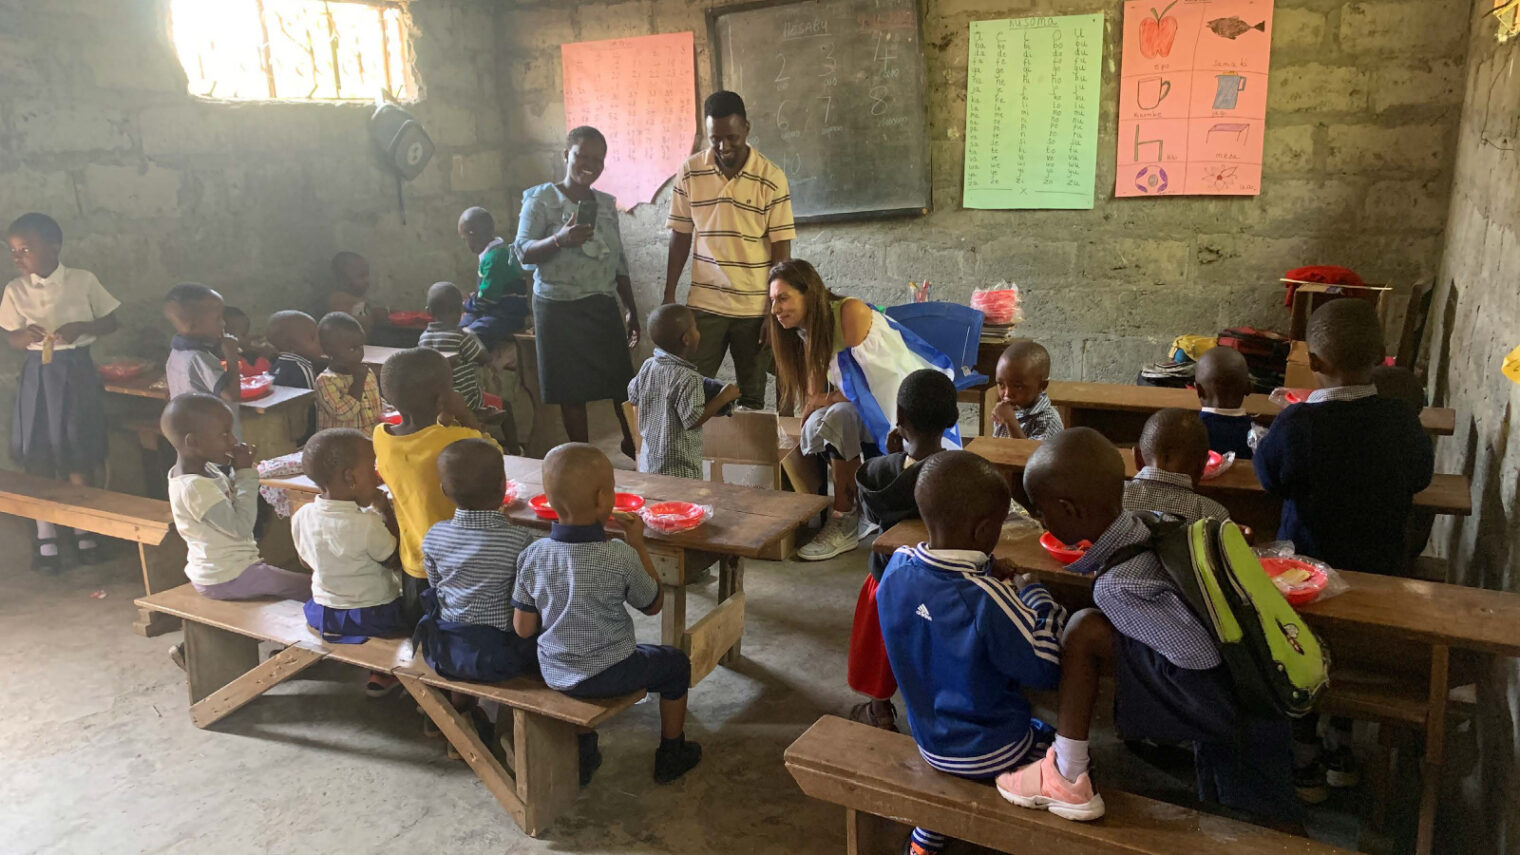 Ayelet Israeli, CEO of HalevAfrica, at a preschool for orphans and children from poor families in the village of Tsamaka in northern Tanzania. Theyâ€™ve just received donated clothes and toys shipped for free by HalevAfrica partner Africa & More. Photo by Wilson/HalevAfrica